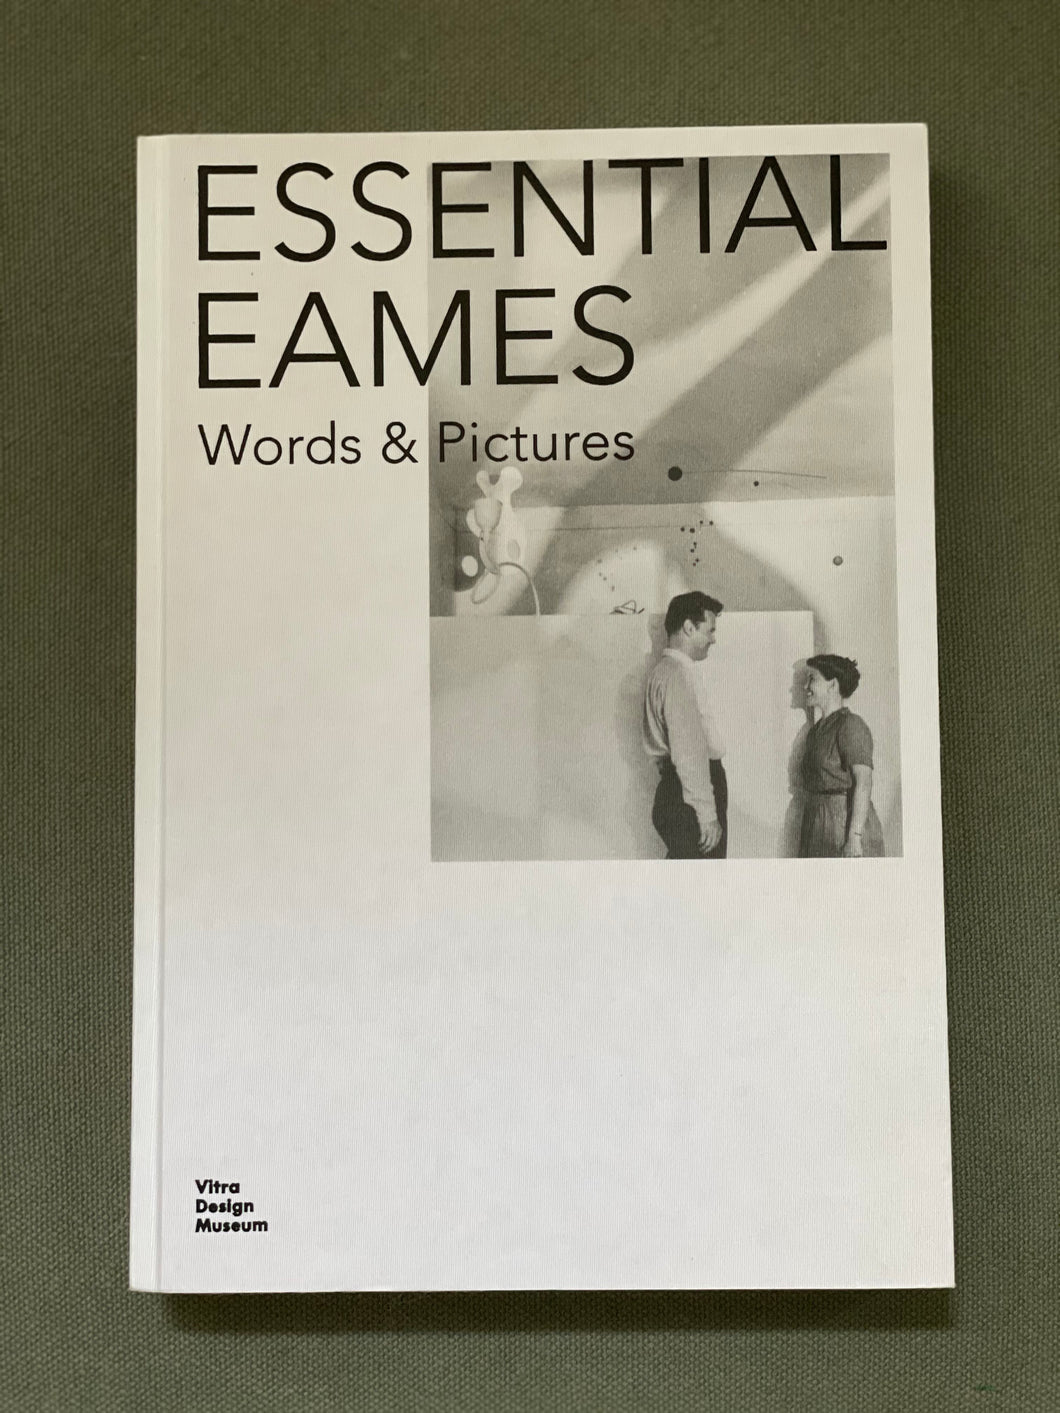 Essential Eames Book by Vitra